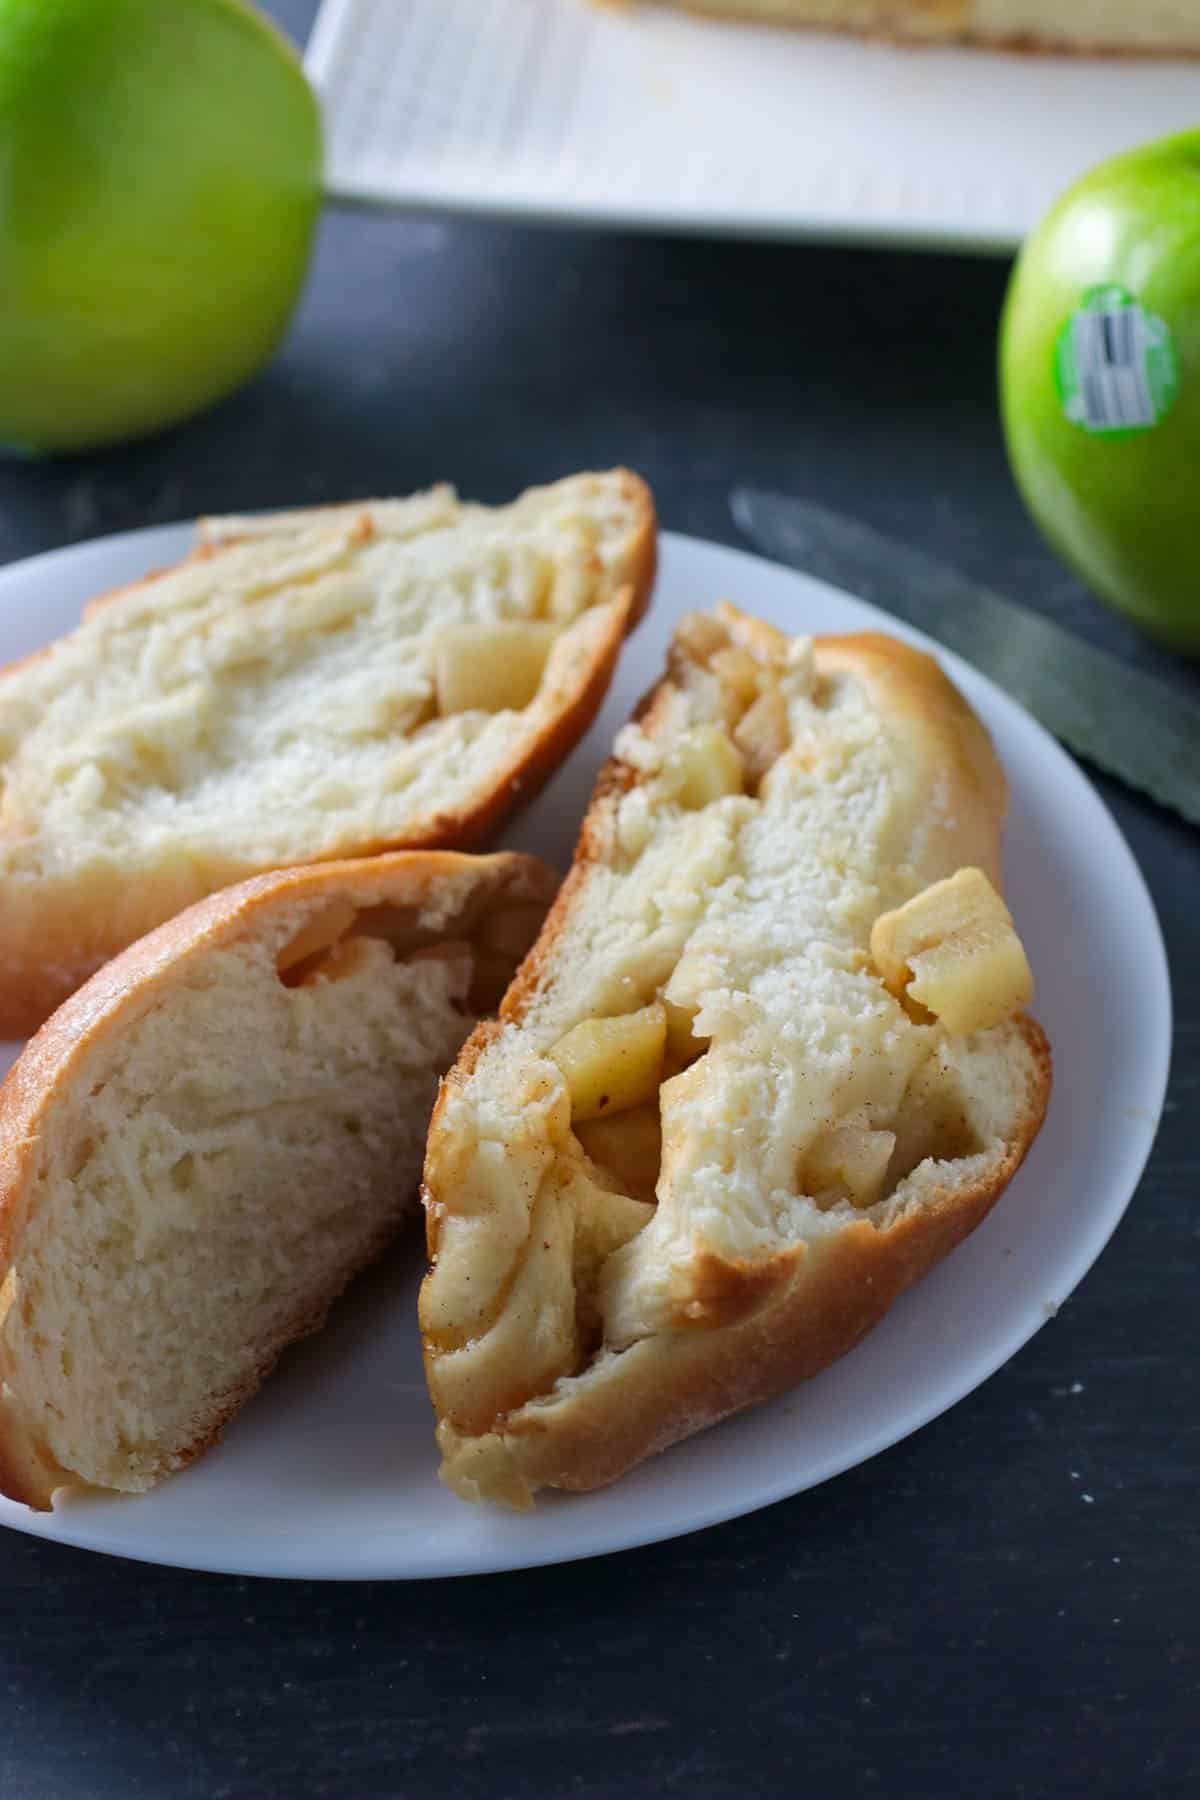   3 slices of Apple challah on a plate.